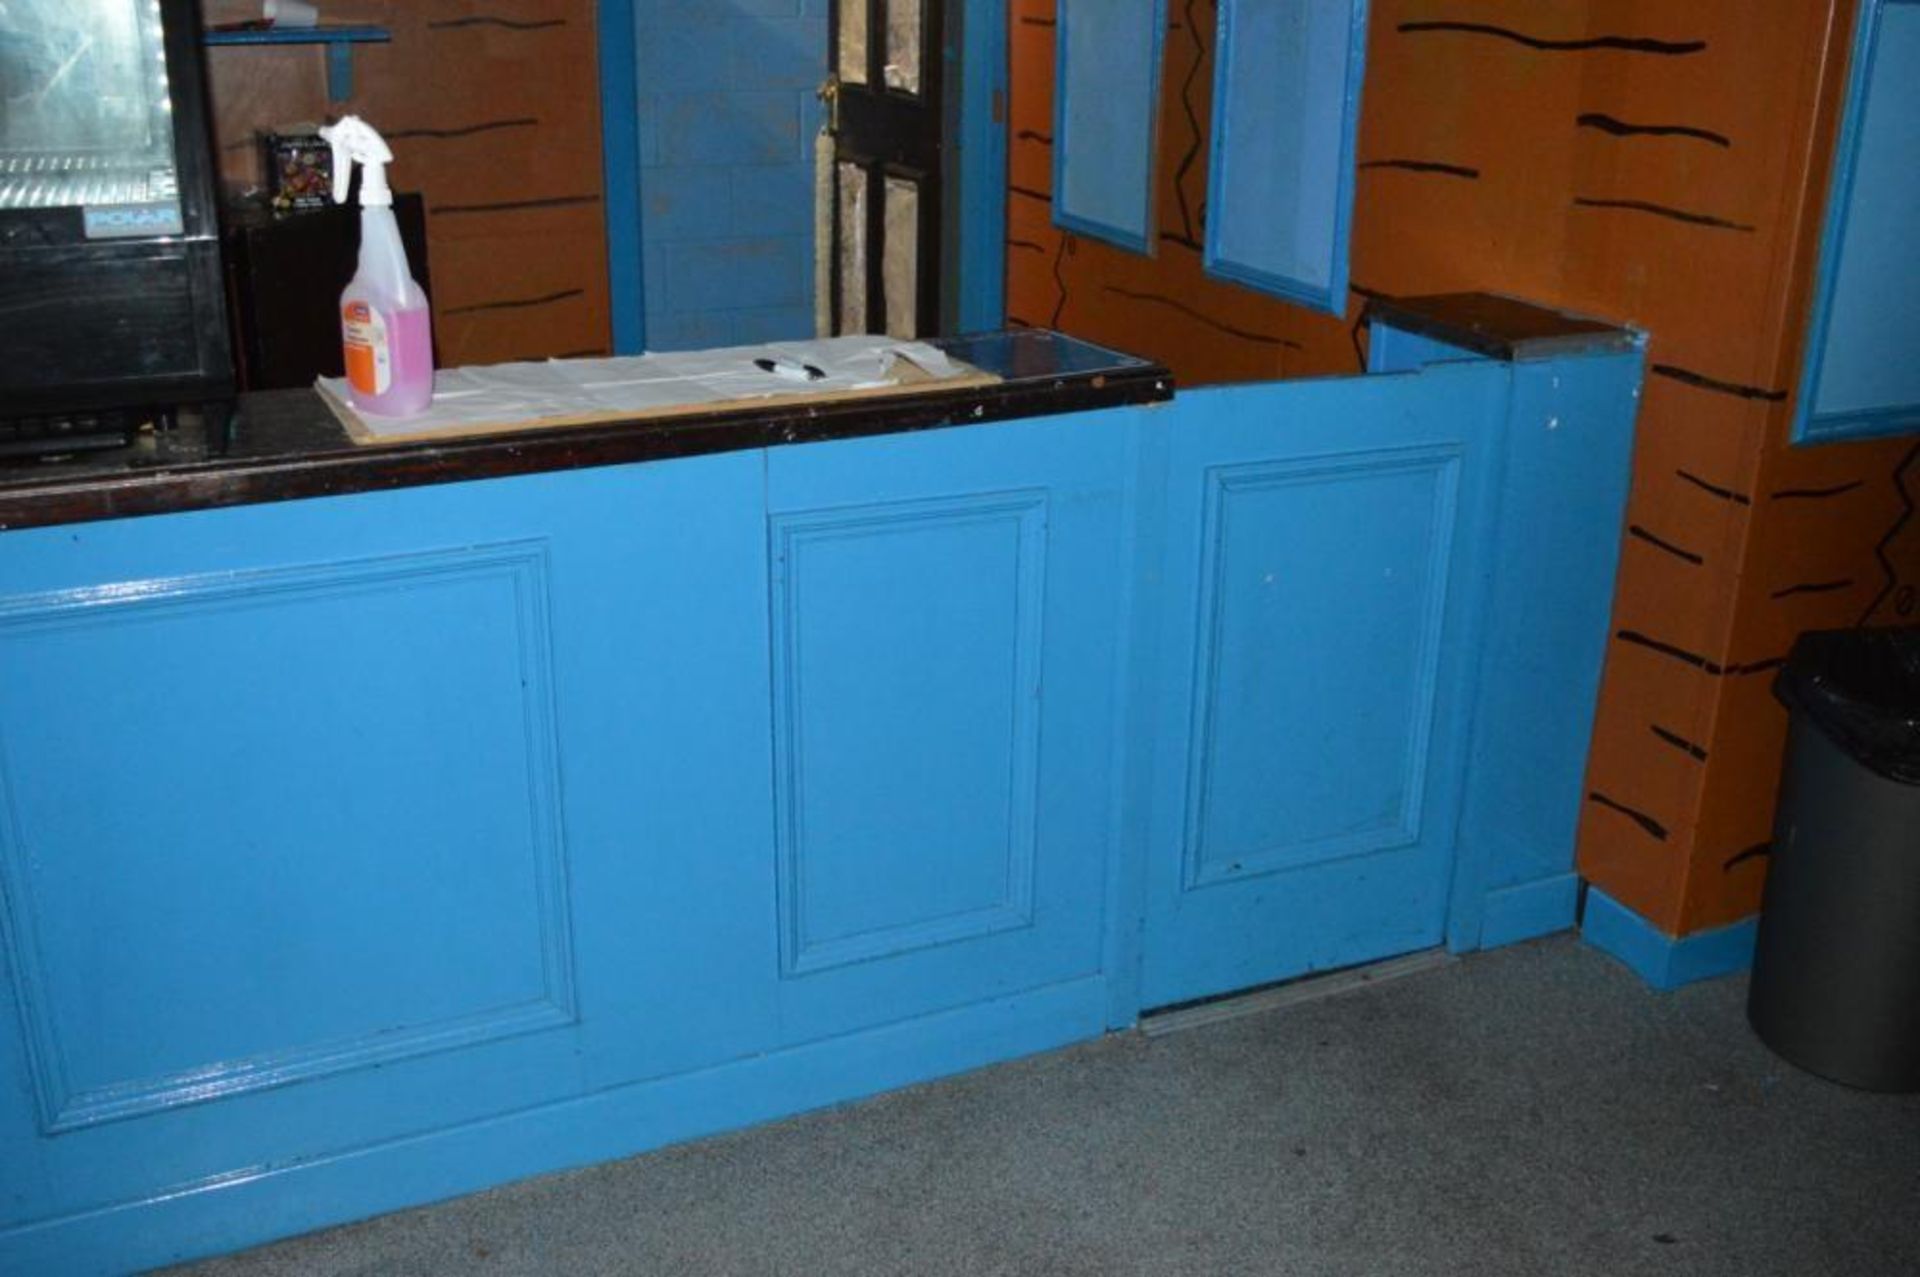 1 x Drinks Bar in Blue With Wooden Counter Top - Includes Backbar Storage and Single Handwash Basin - Image 2 of 11